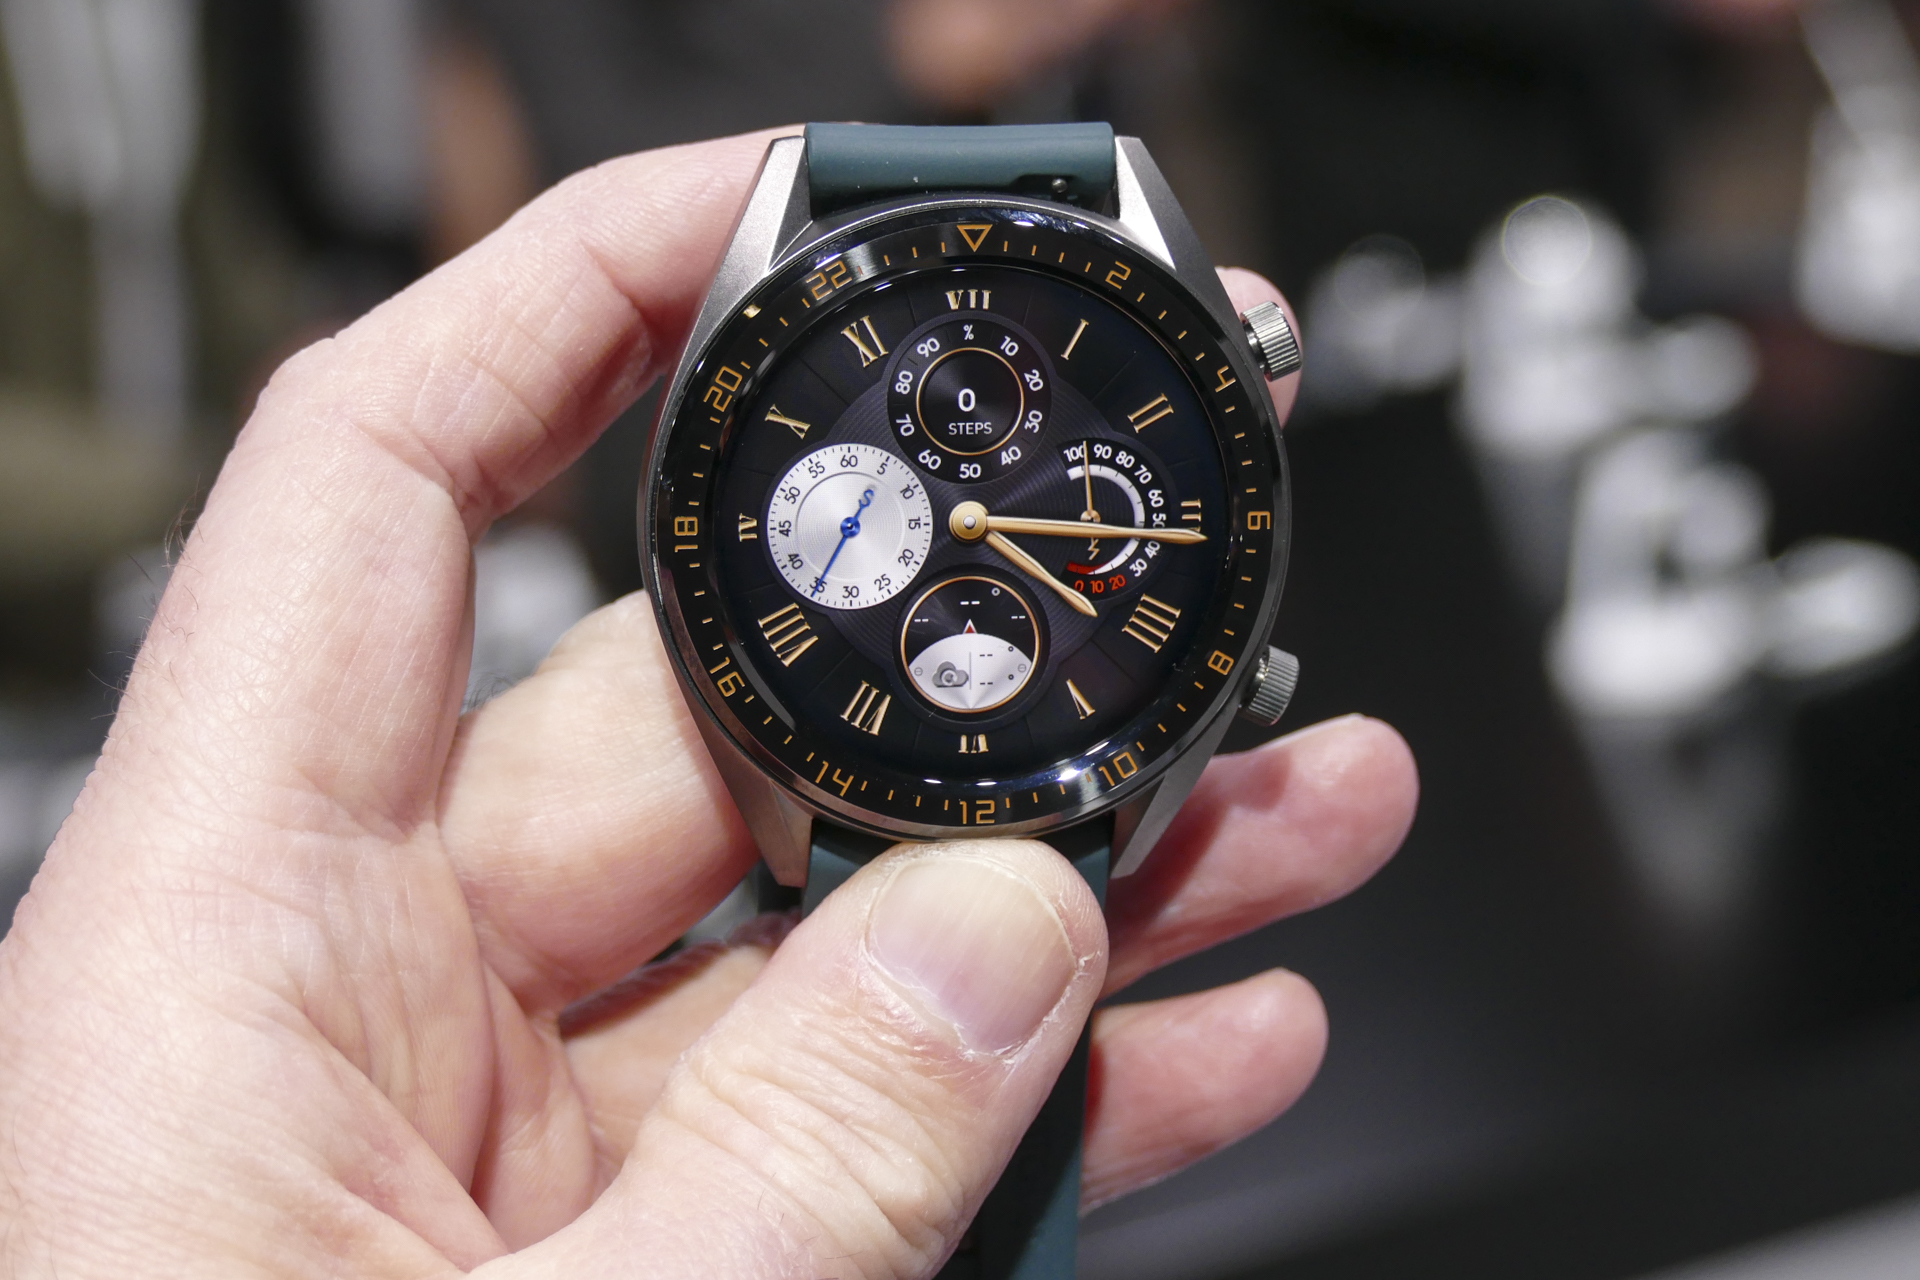 Huawei Watch GT Hands-on Review: It's Got The Look